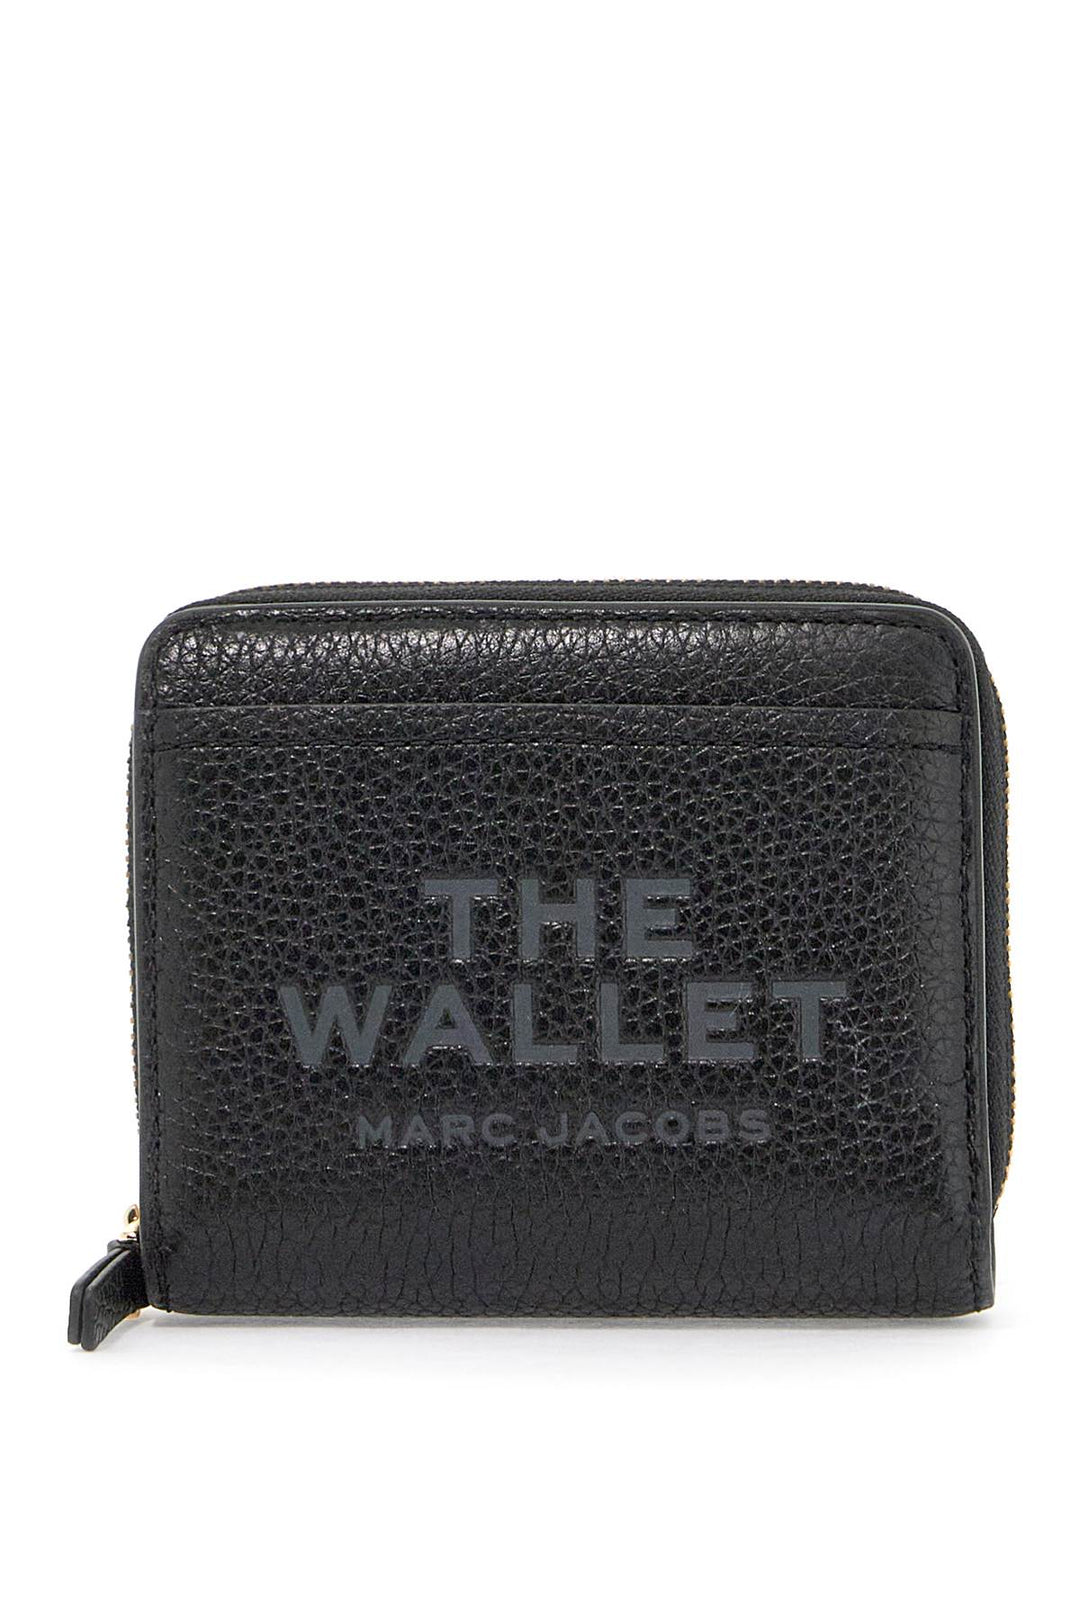 Marc Jacobs The Leather Mini Compact Wallet   Black